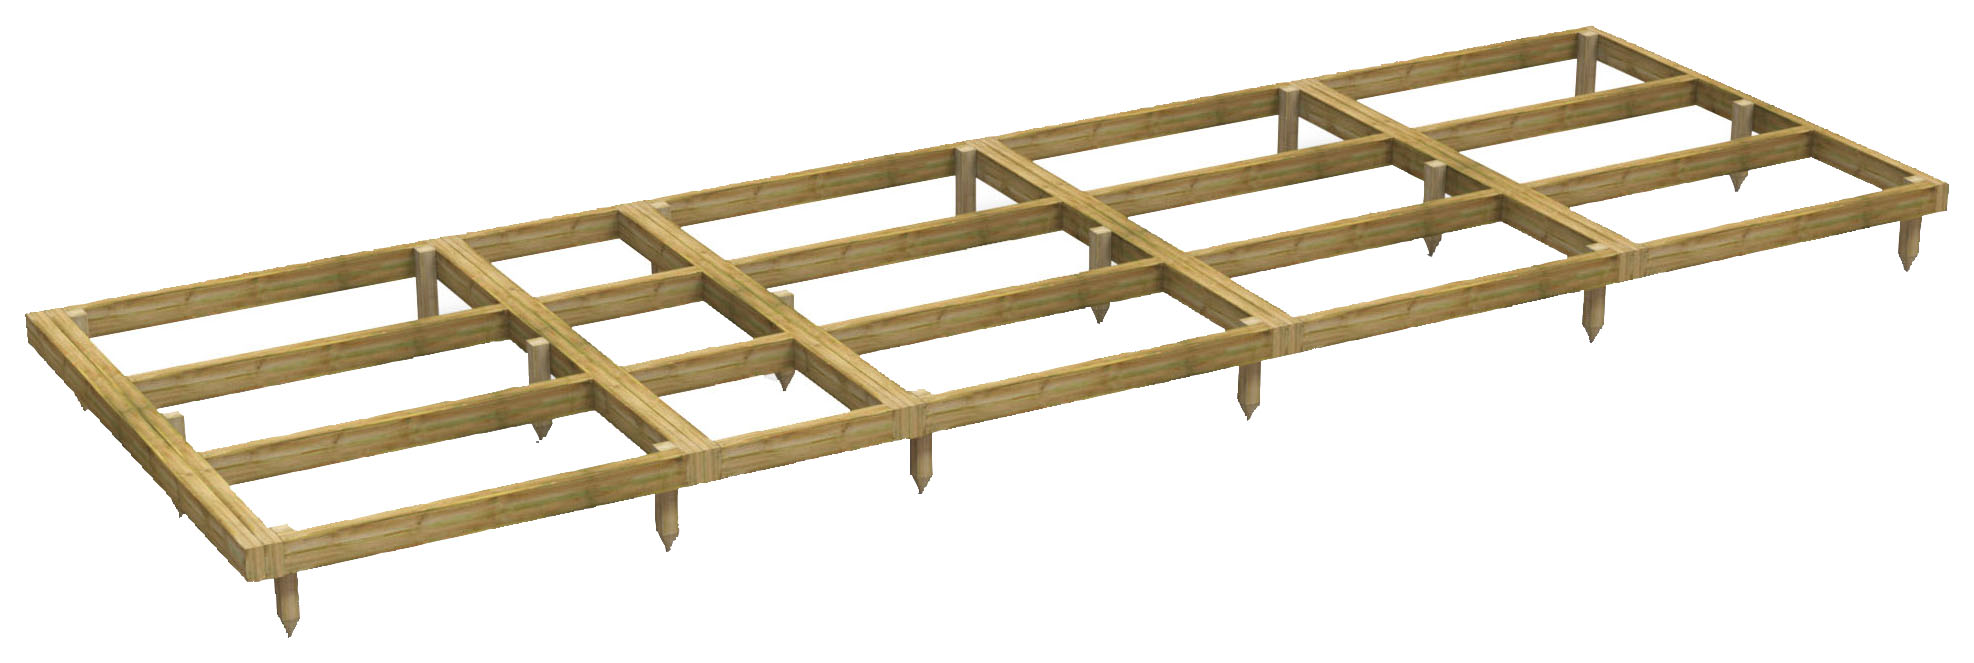 Image of Power Sheds 18 x 6ft Pressure Treated Garden Building Base Kit